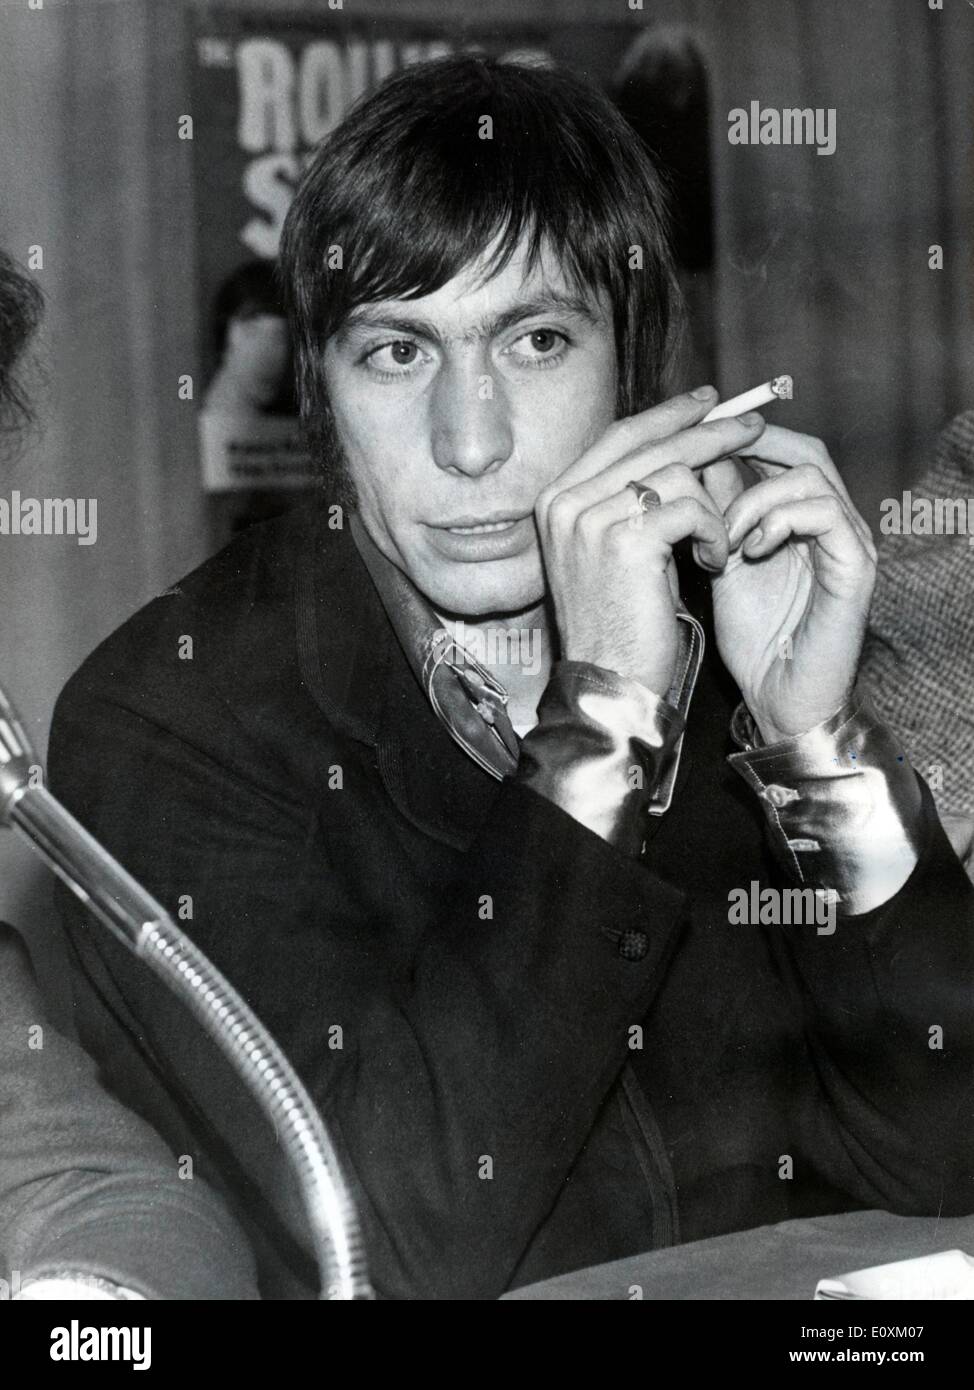 Rolling Stones drummer Charlie Watts at the Golden Record Awards Stock  Photo - Alamy